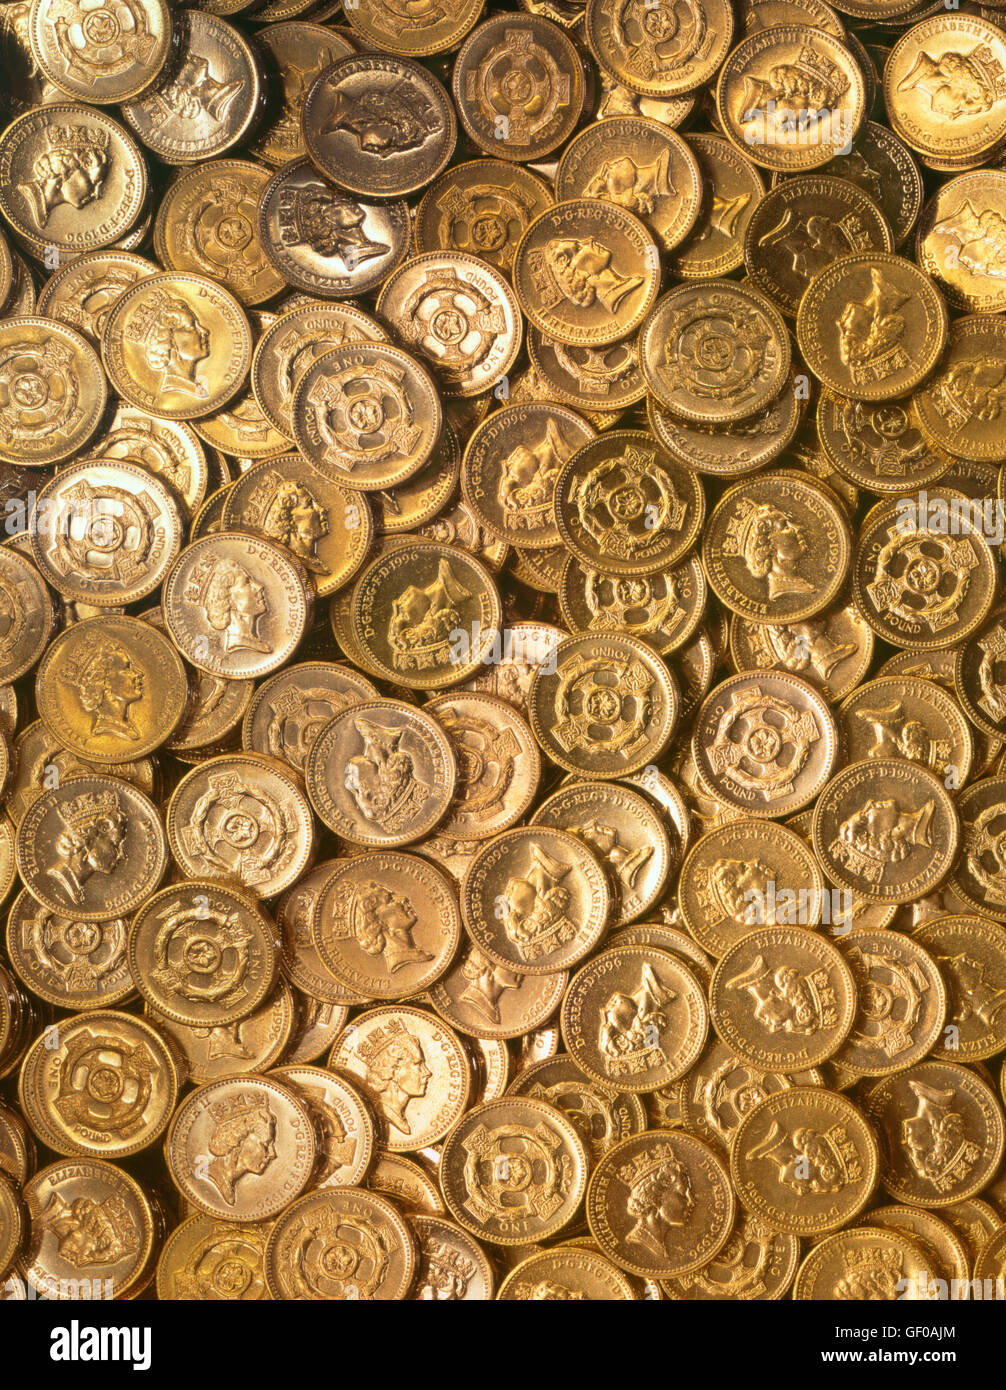 Many pound coins stacked on top of one another Stock Photo